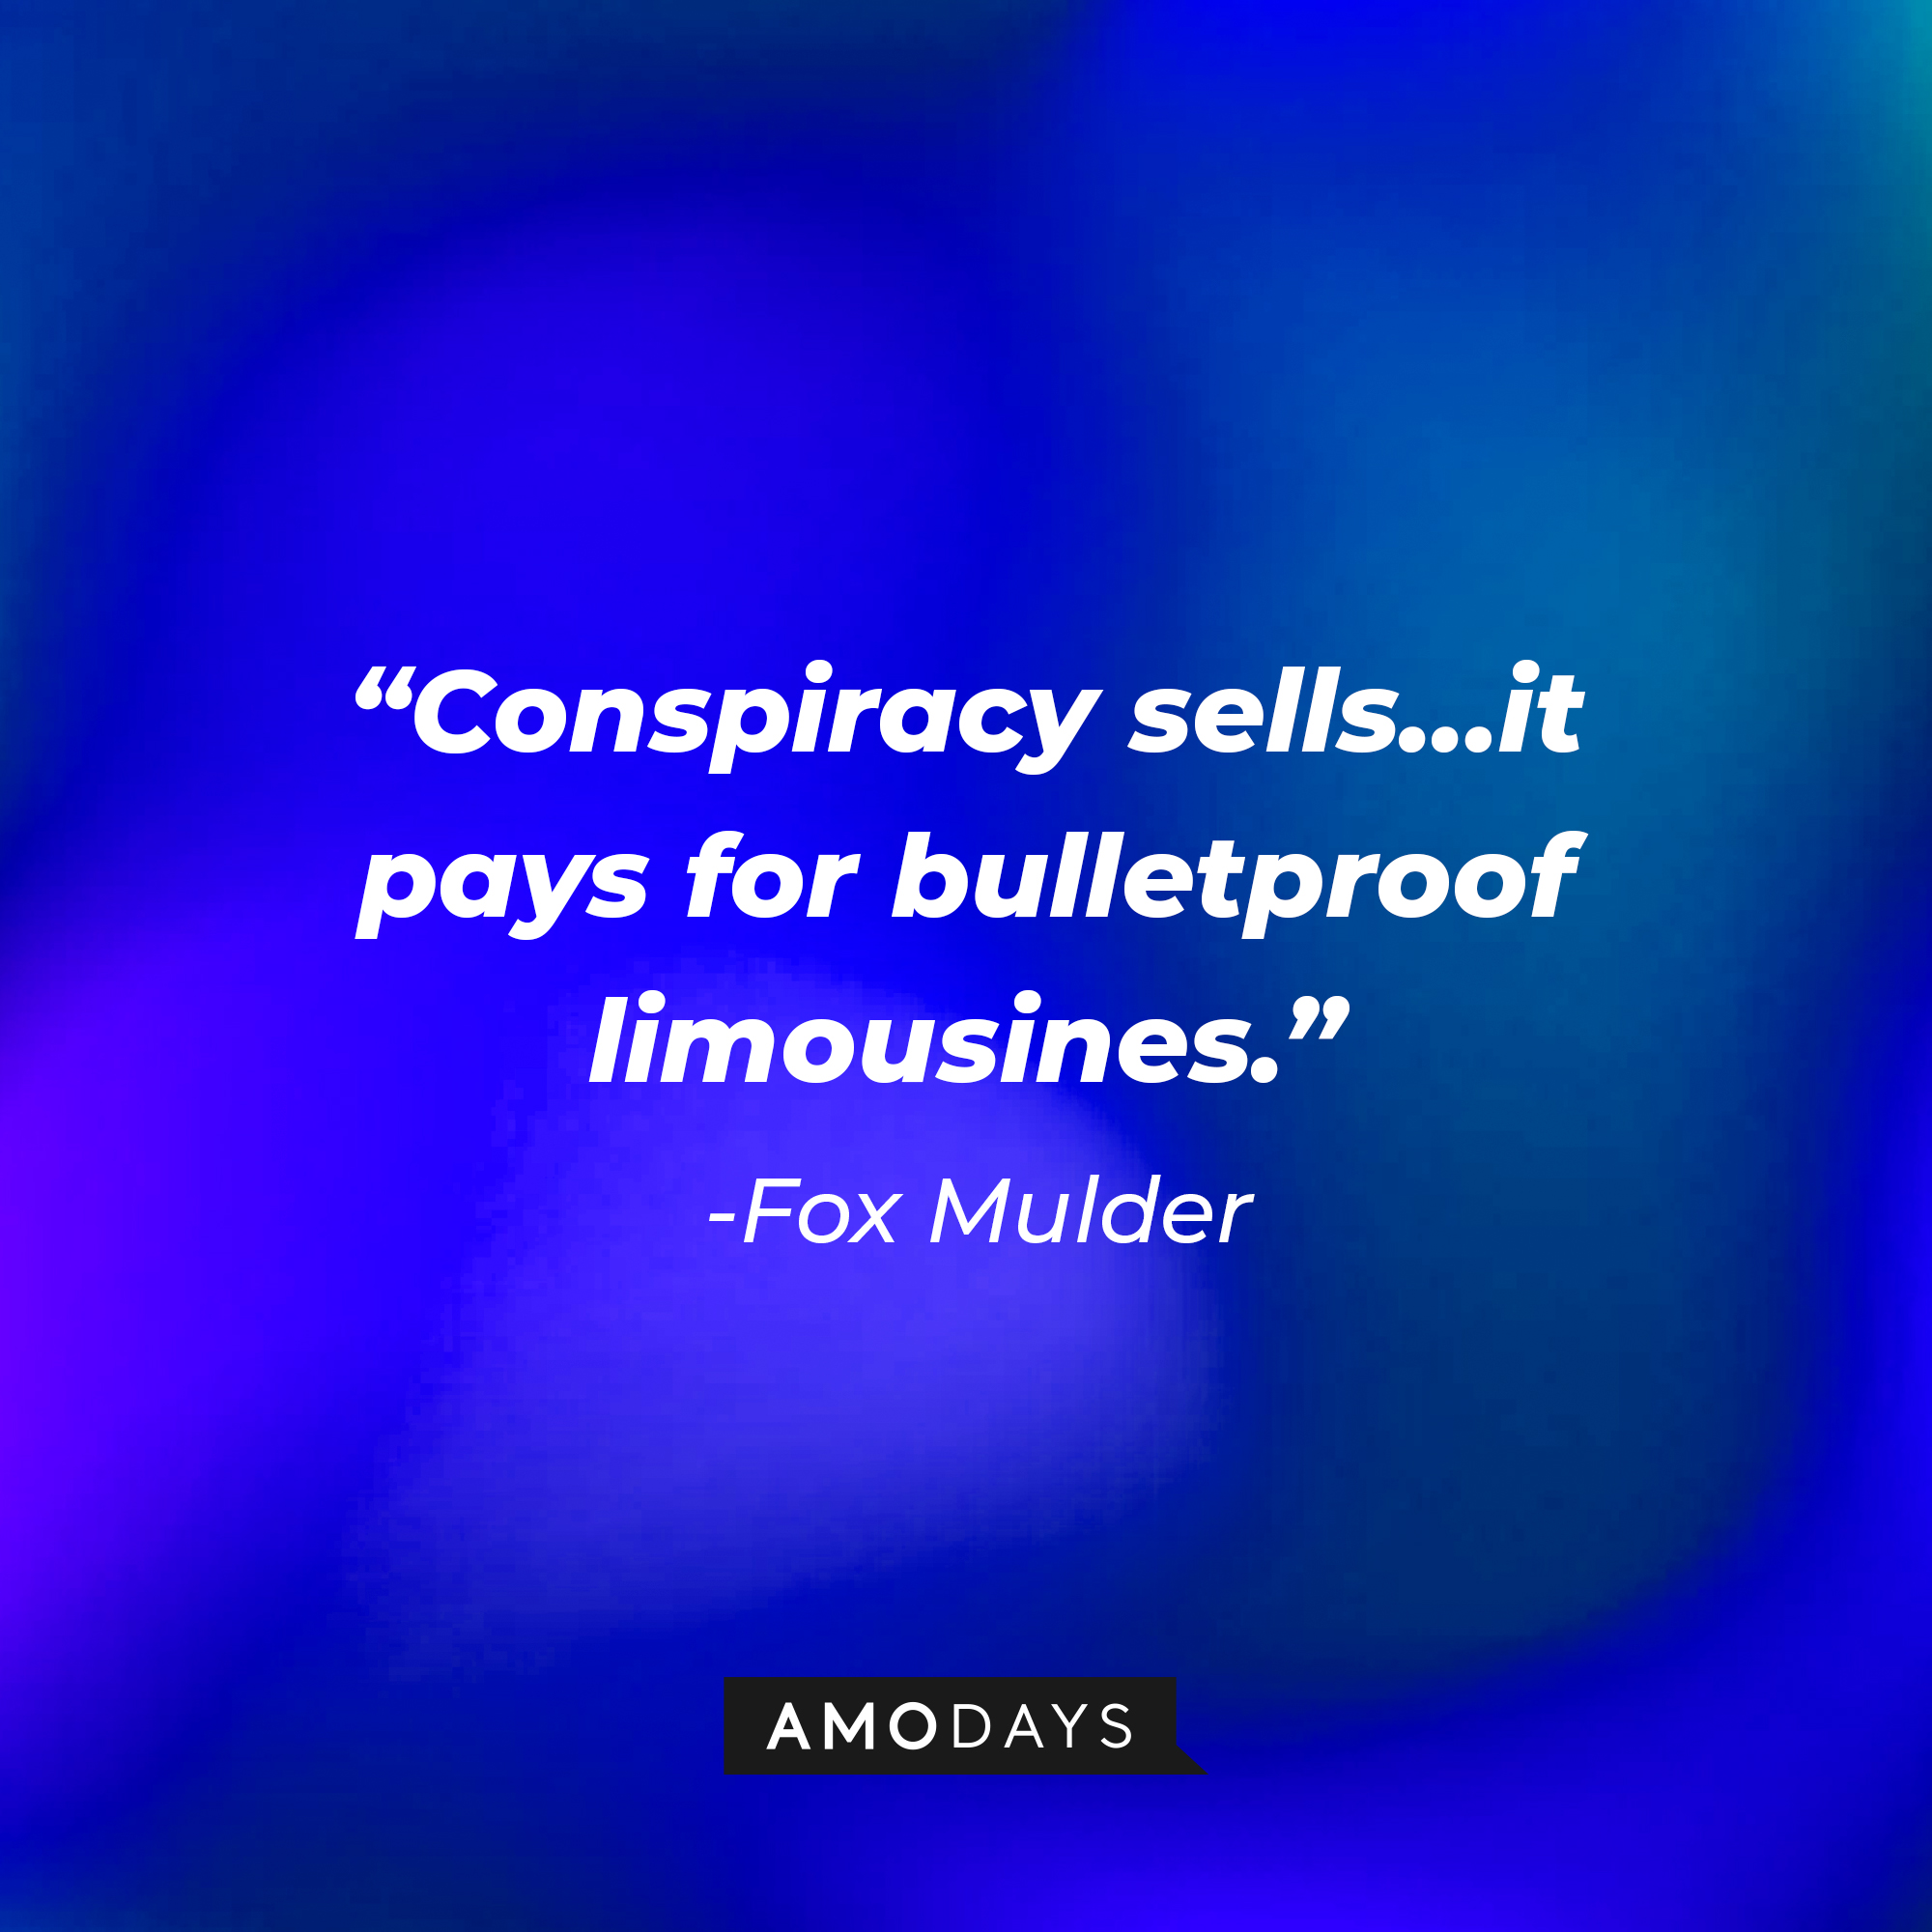 Fox Mulder's quote: "Conspiracy sells…it pays for bulletproof limousines." | Source: AmoDays